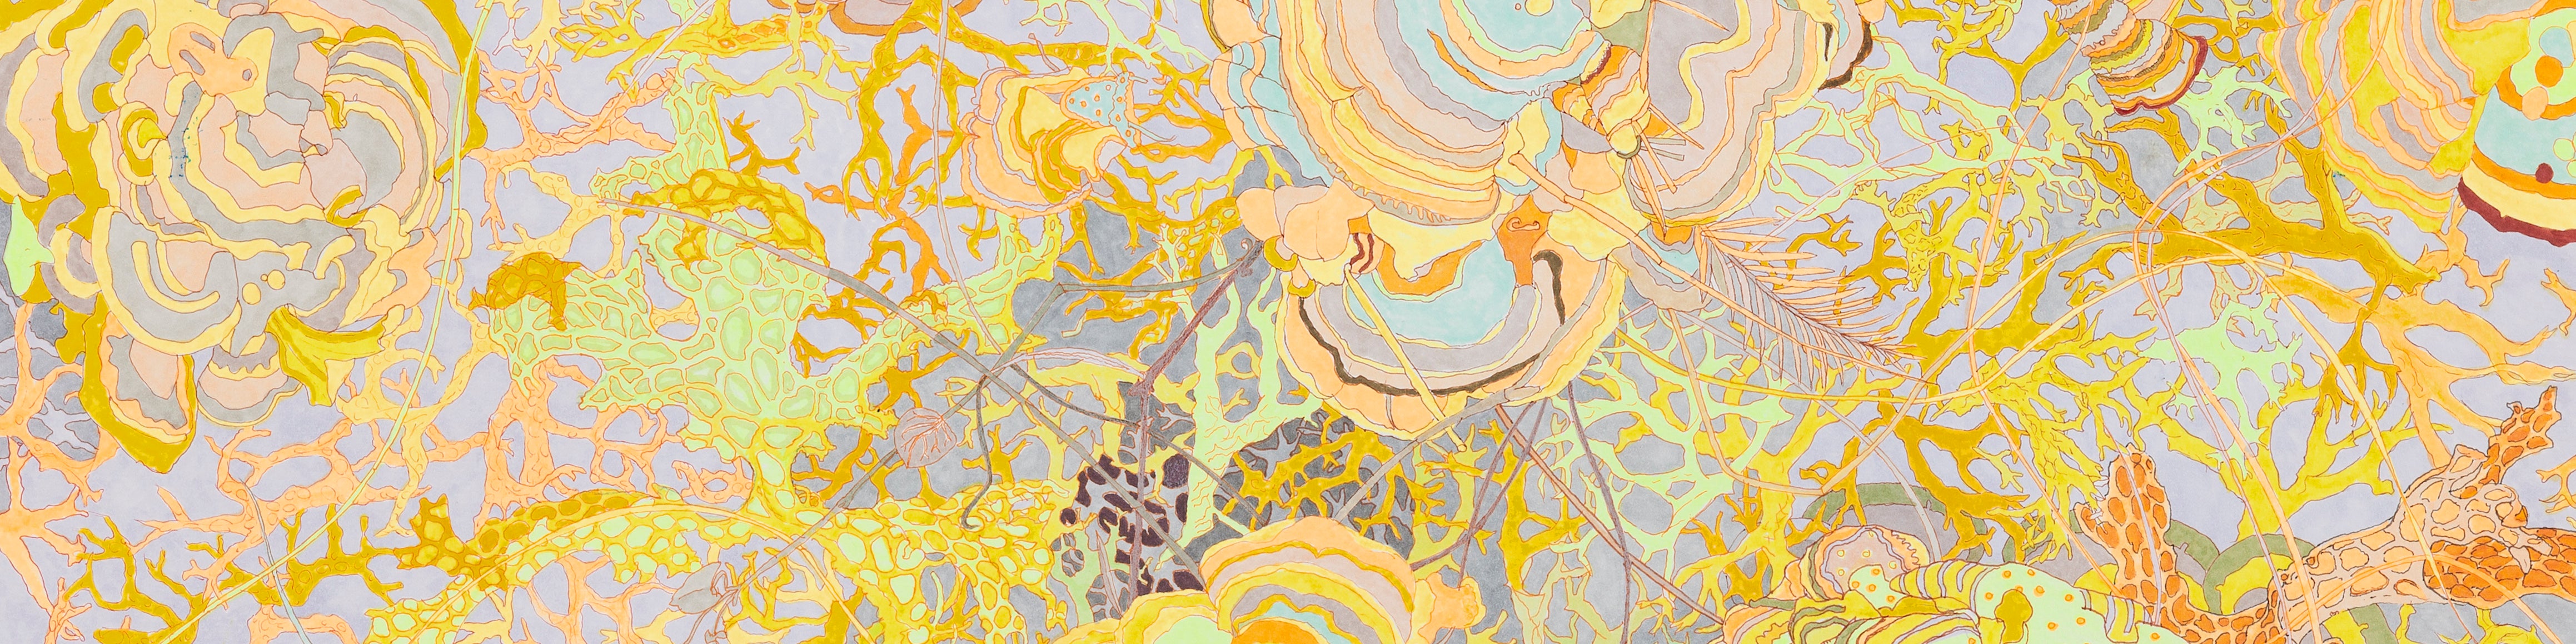 Polypore fungi drawn in a art nouveau style with a profusion of color